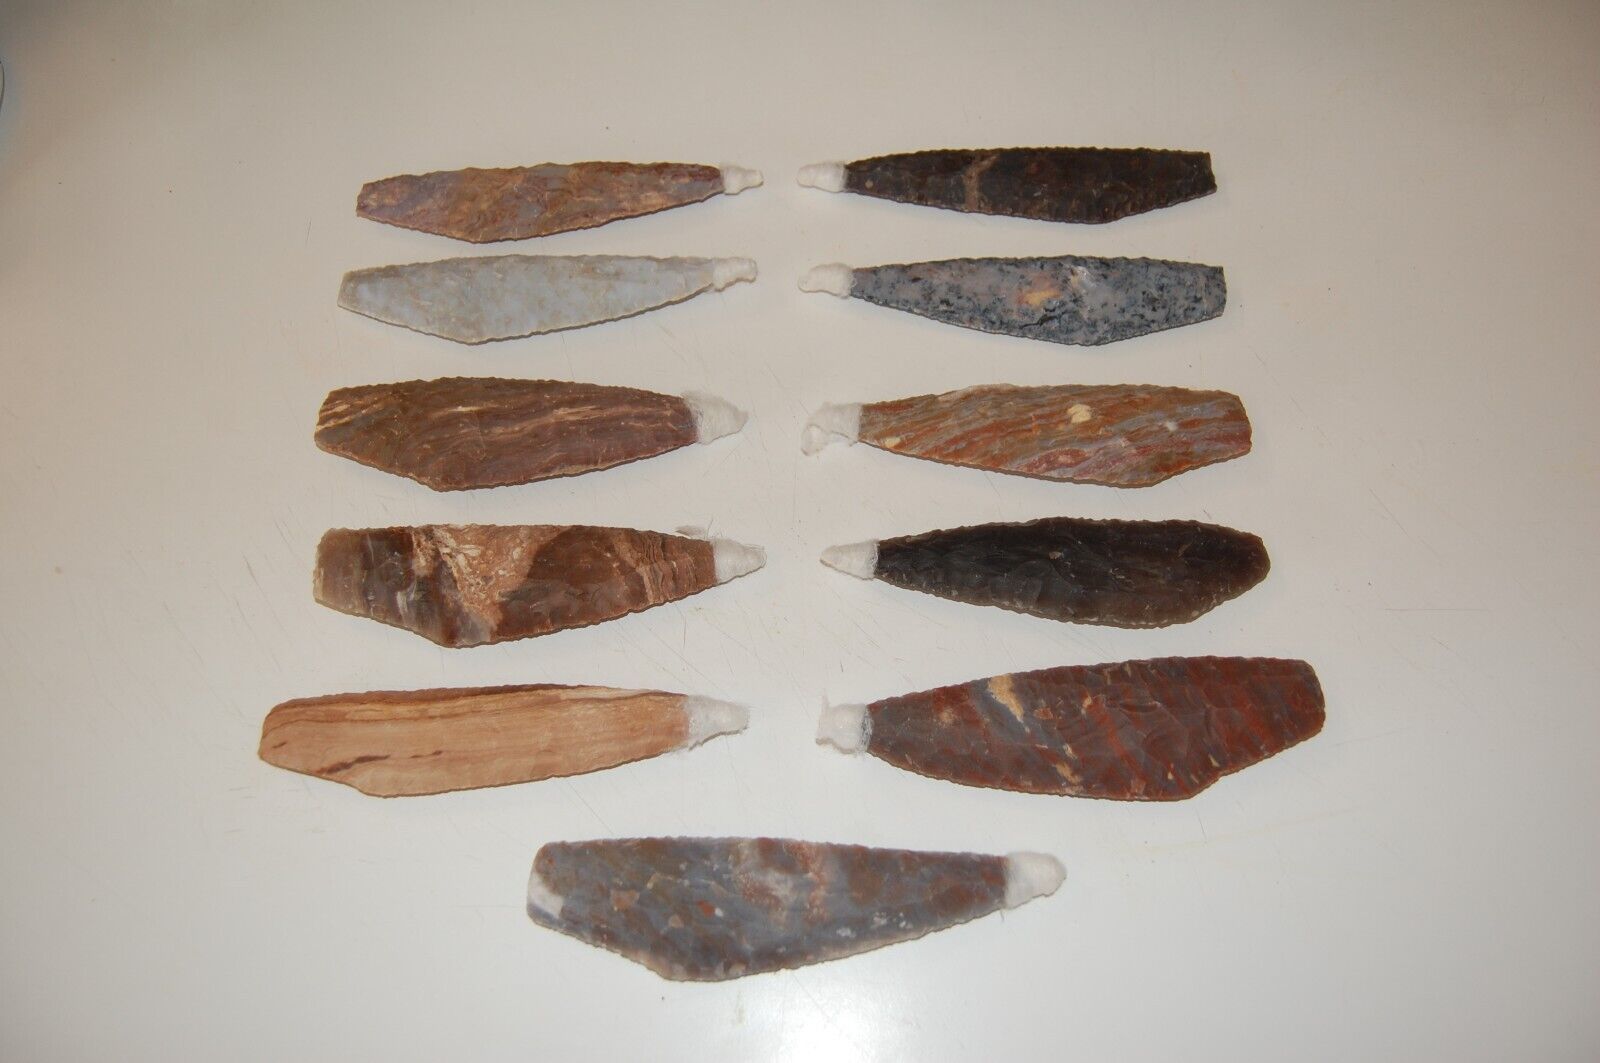 1 Hand Made Flint Agate Knife Blade  Average 5" to 6"  Inches Long Arrowheads Без бренда